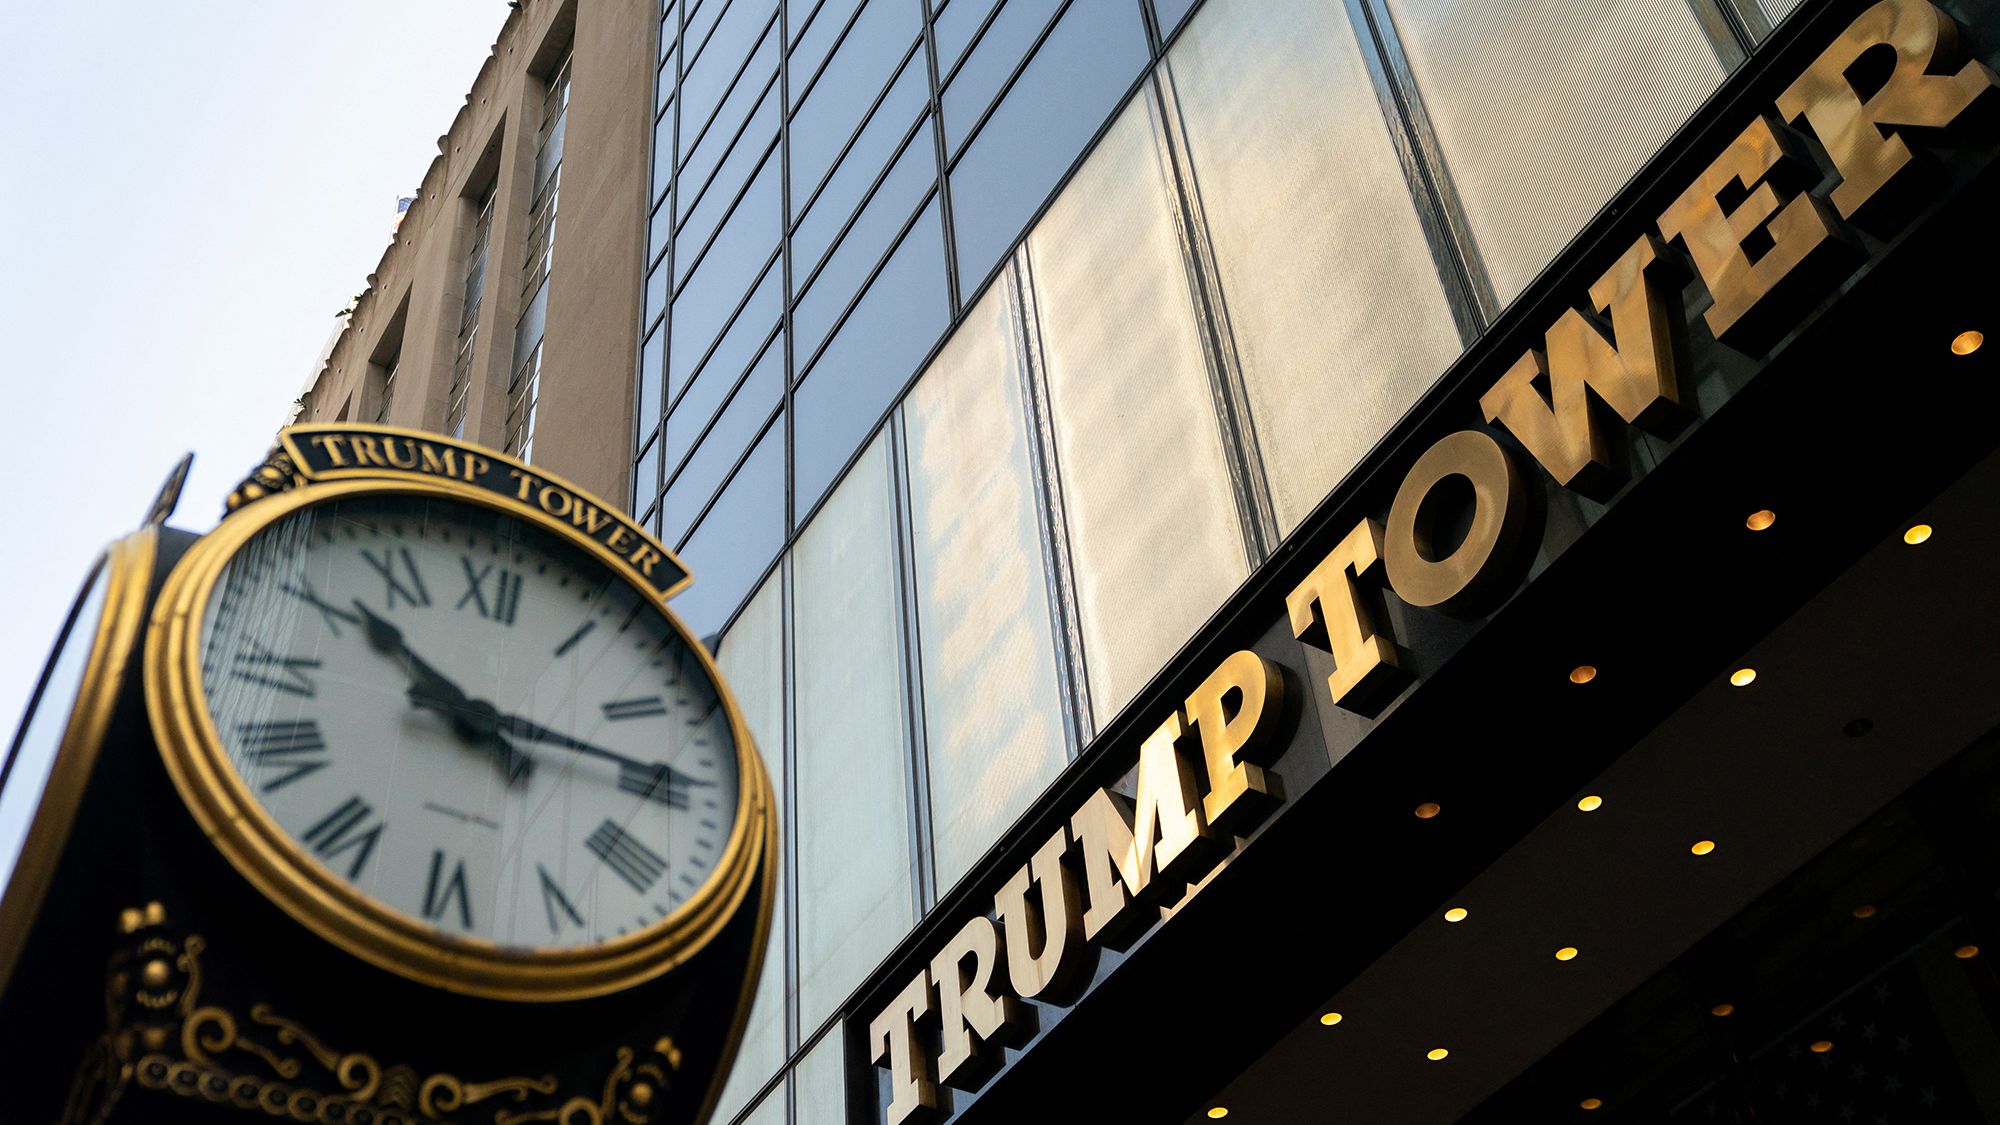 Trump Tower on Fifth Avenue in New York City is perhaps the former president's most recognizable asset.